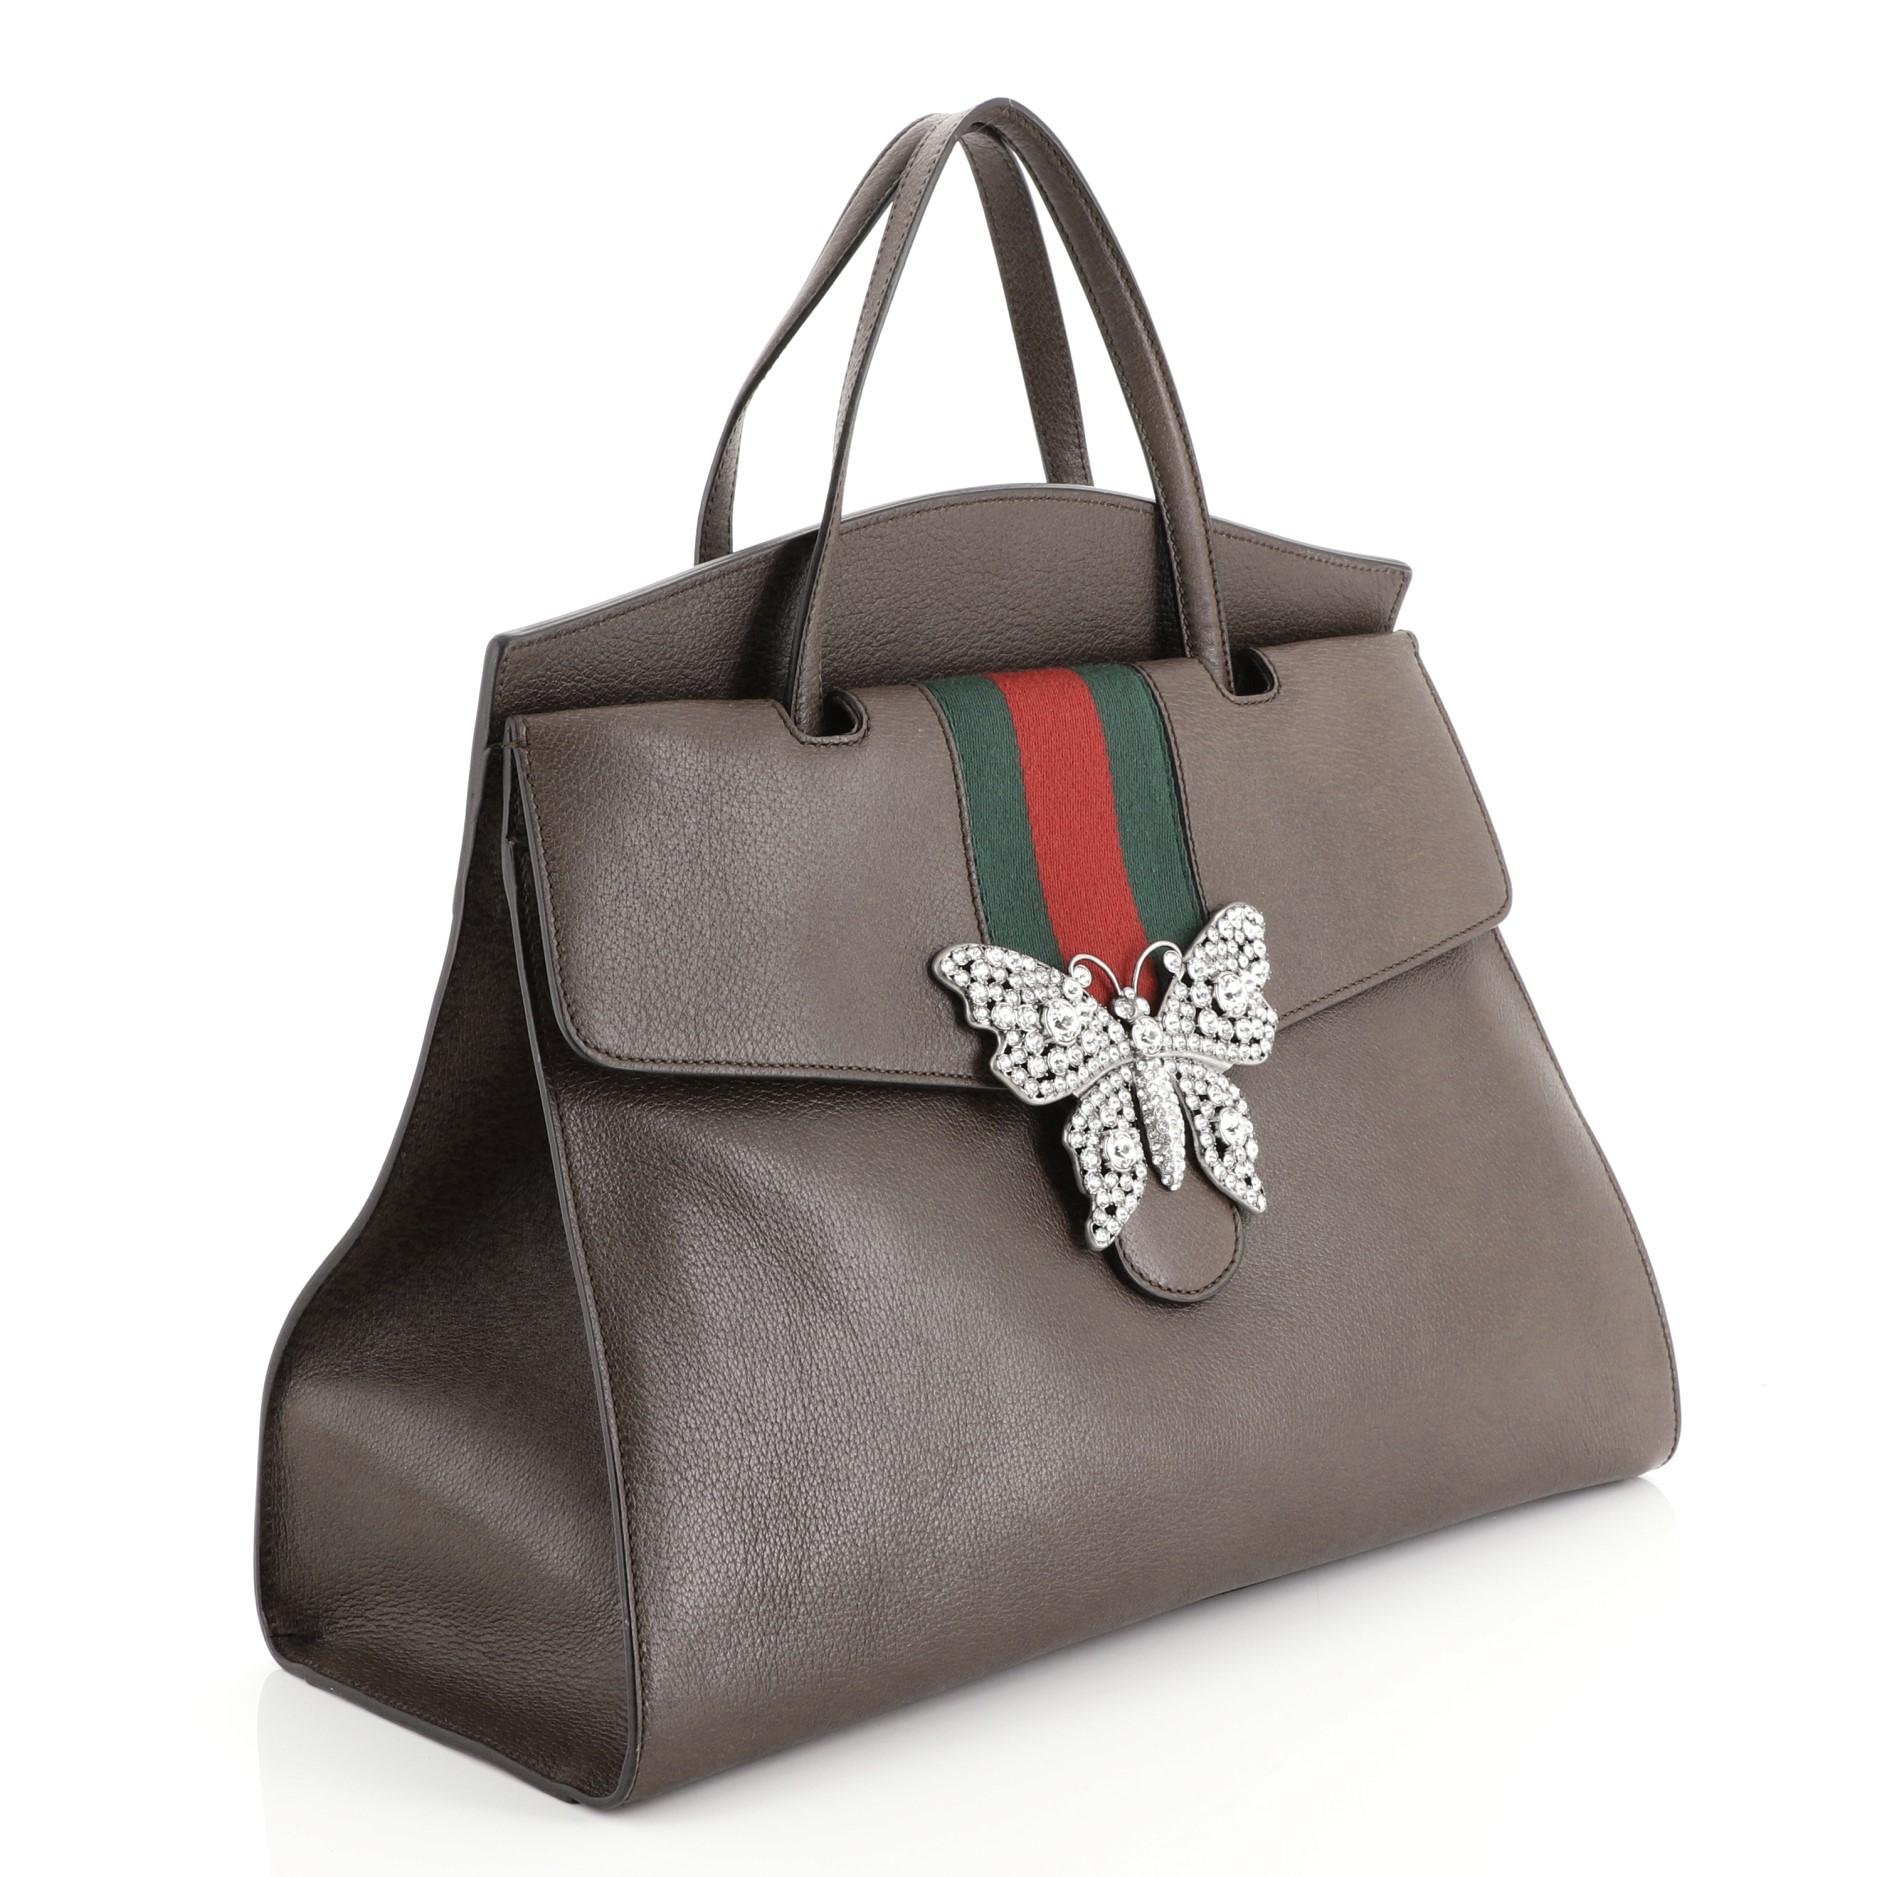 This Gucci Totem Top Handle Bag Leather Large, crafted from brown leather, features dual leather top handles, green and red web with crystal butterfly ornament, and silver-tone hardware. Its press-lock closure opens to a neutral microfiber interior